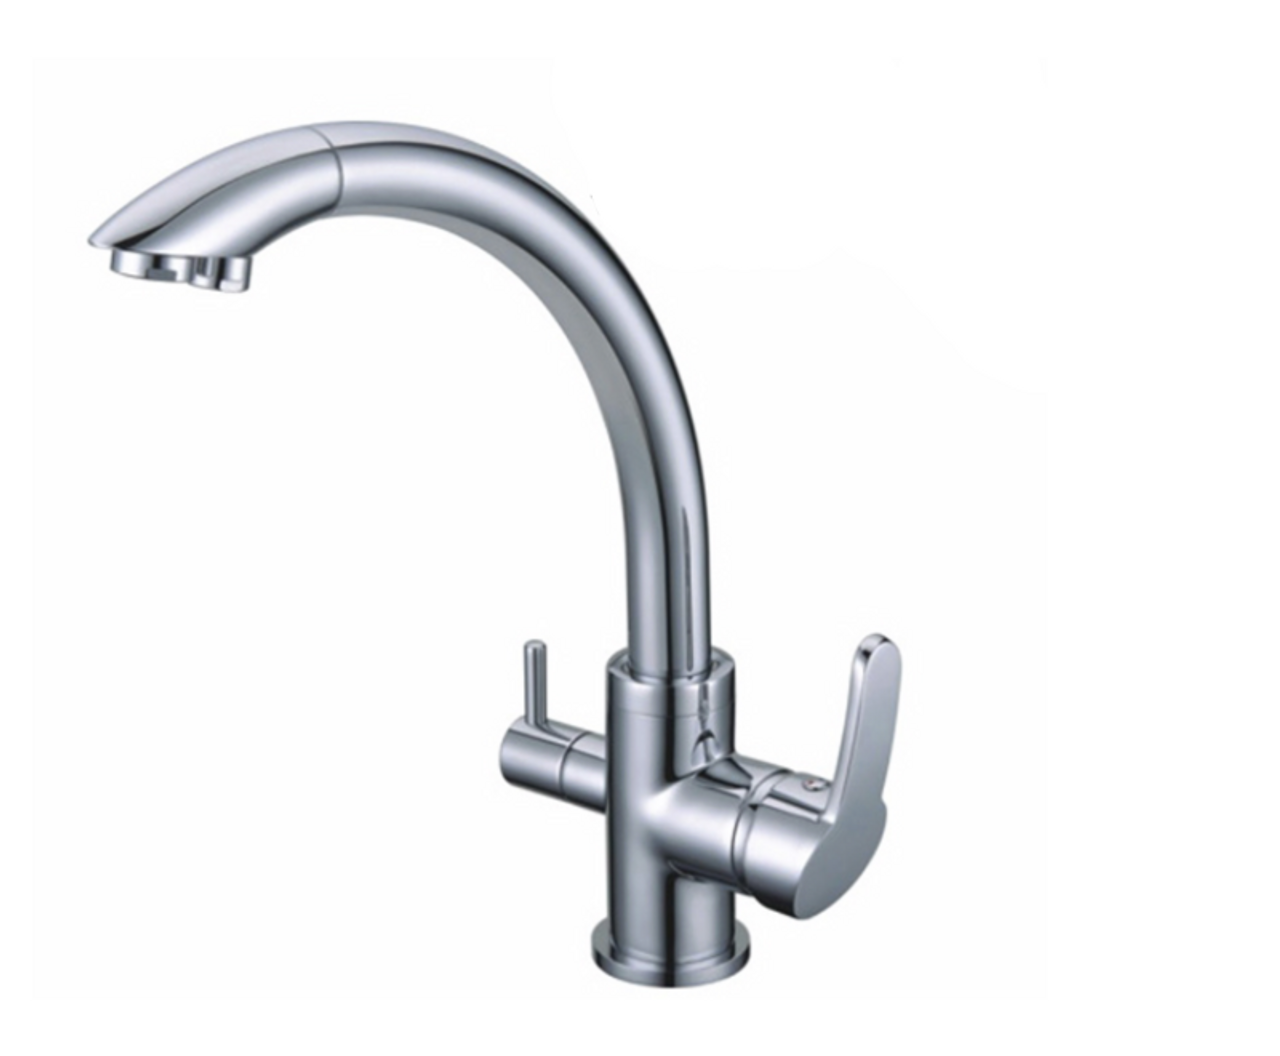 Waterlux Wl 304 Elegant Three Way Hot Cold Kitchen Faucet For Ro